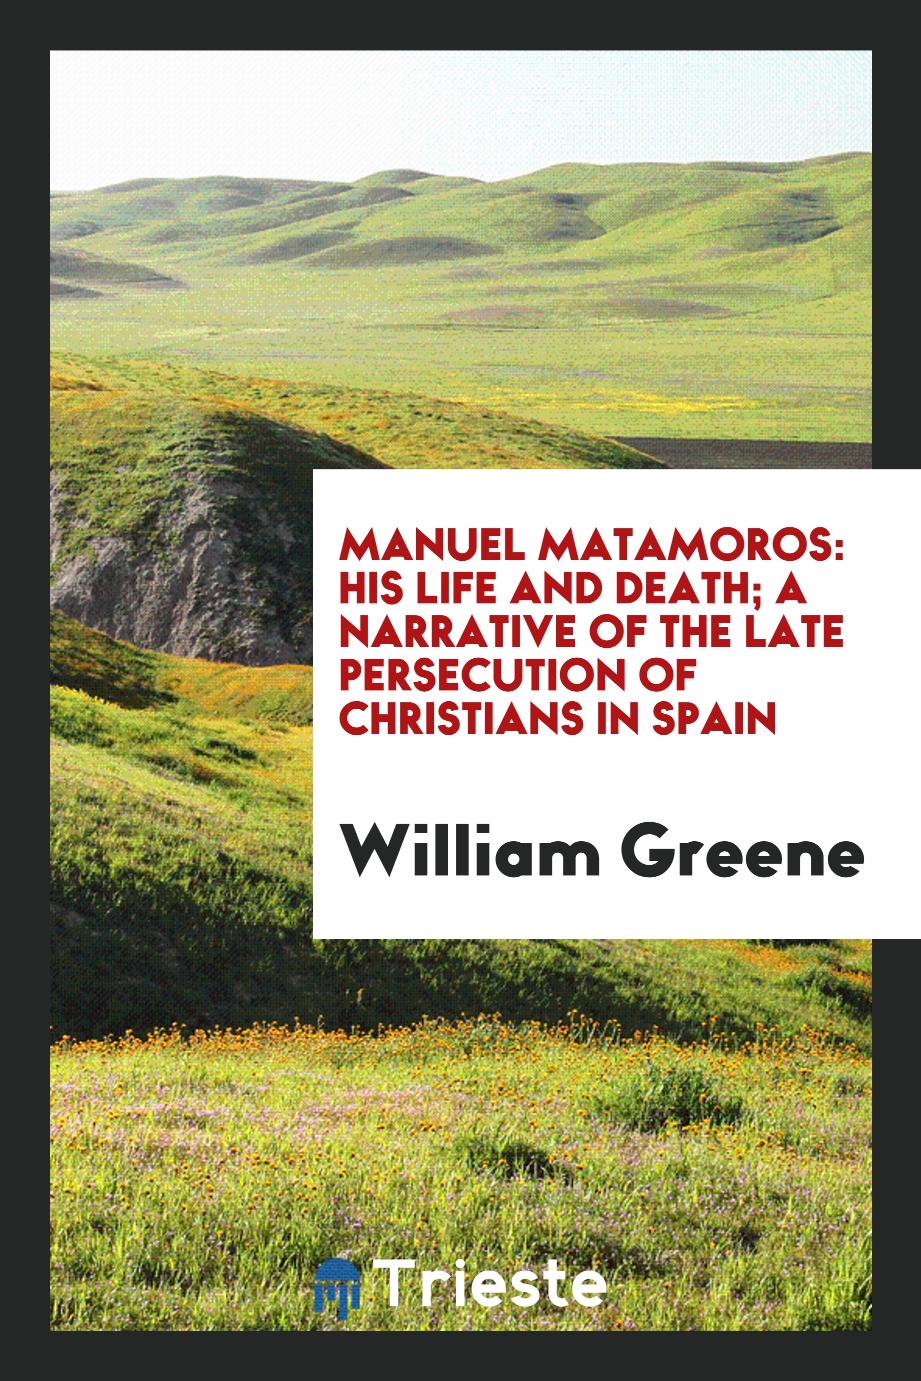 Manuel Matamoros: his life and death; a narrative of the late persecution of Christians in Spain